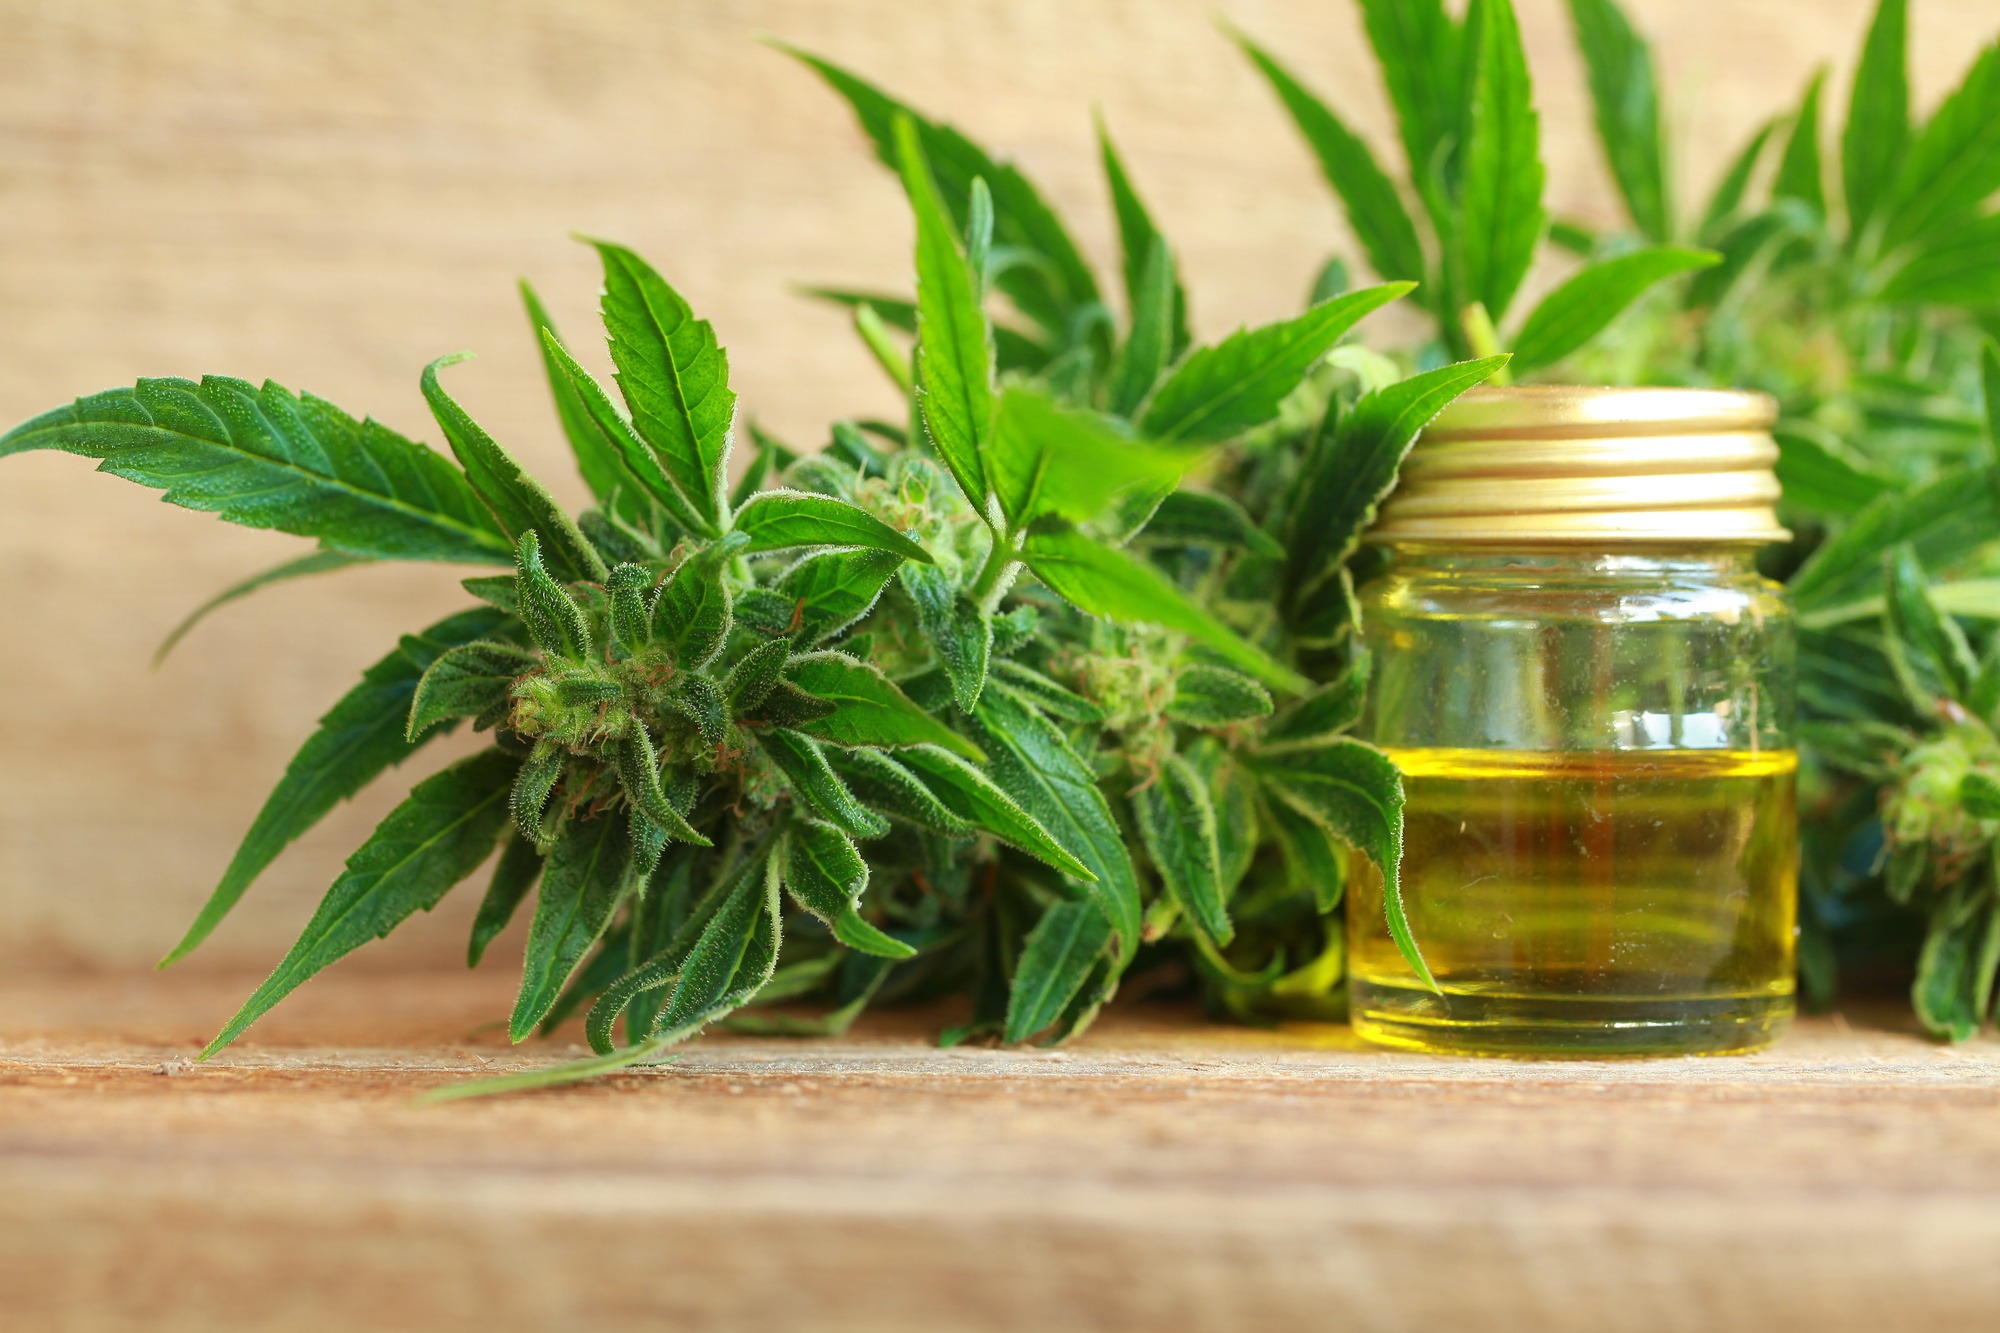 Get the Truth About CBD: 7 Little Known Facts About